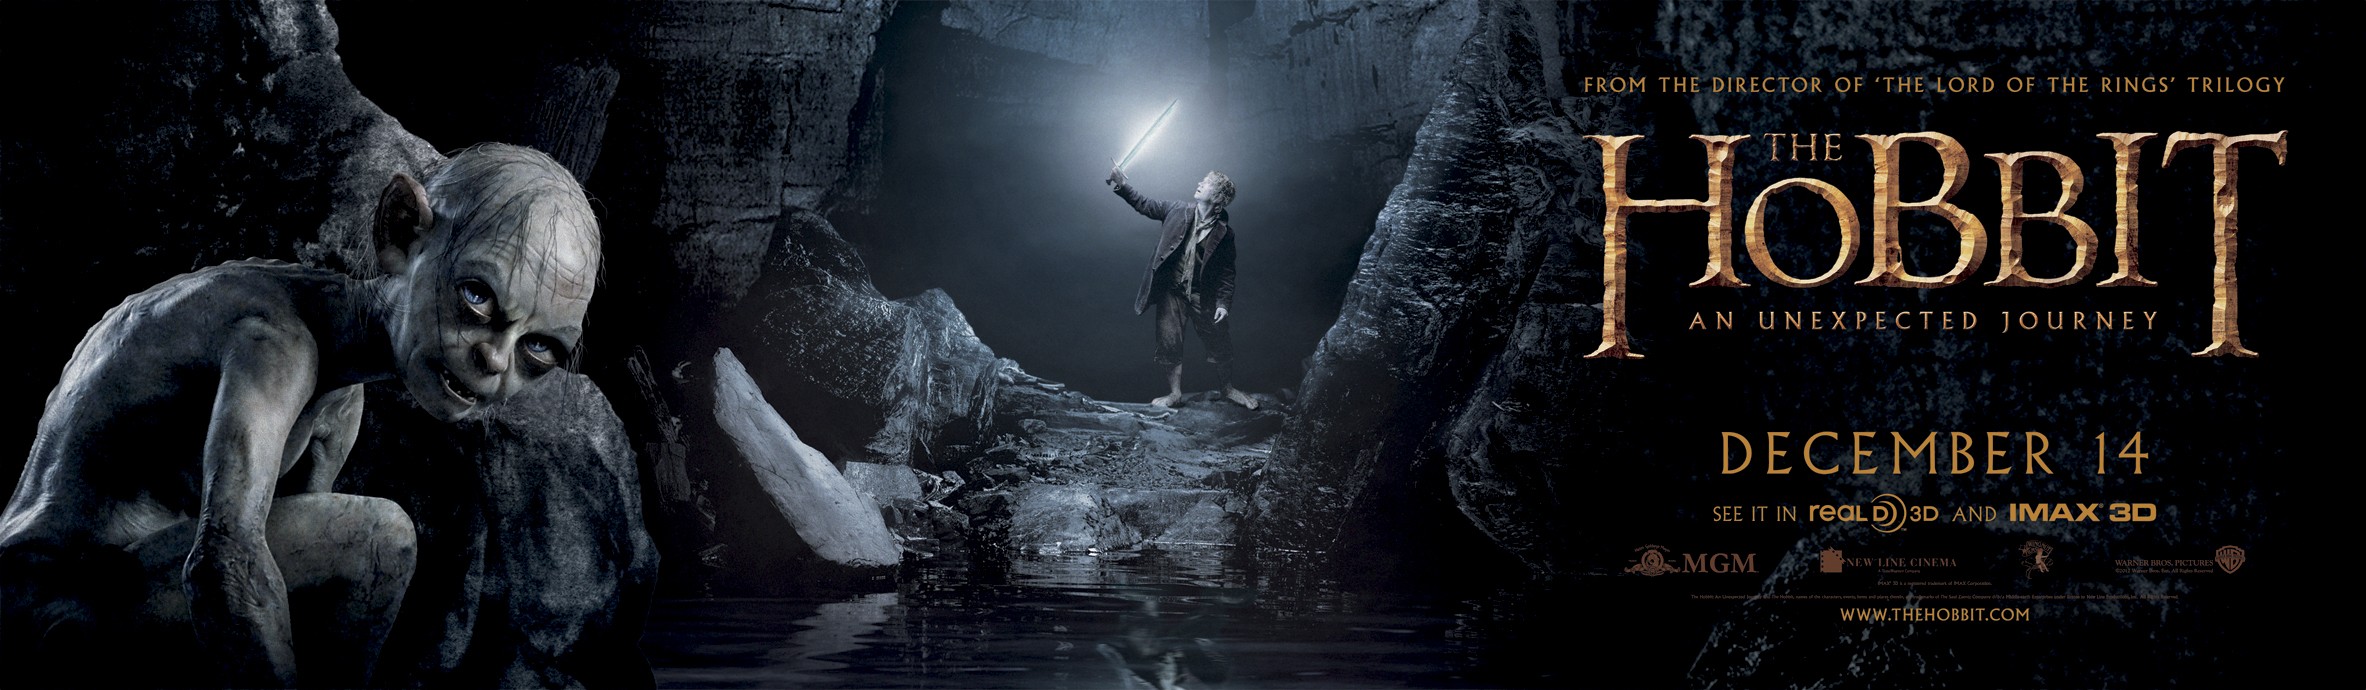 Mega Sized Movie Poster Image for The Hobbit: An Unexpected Journey (#7 of 39)